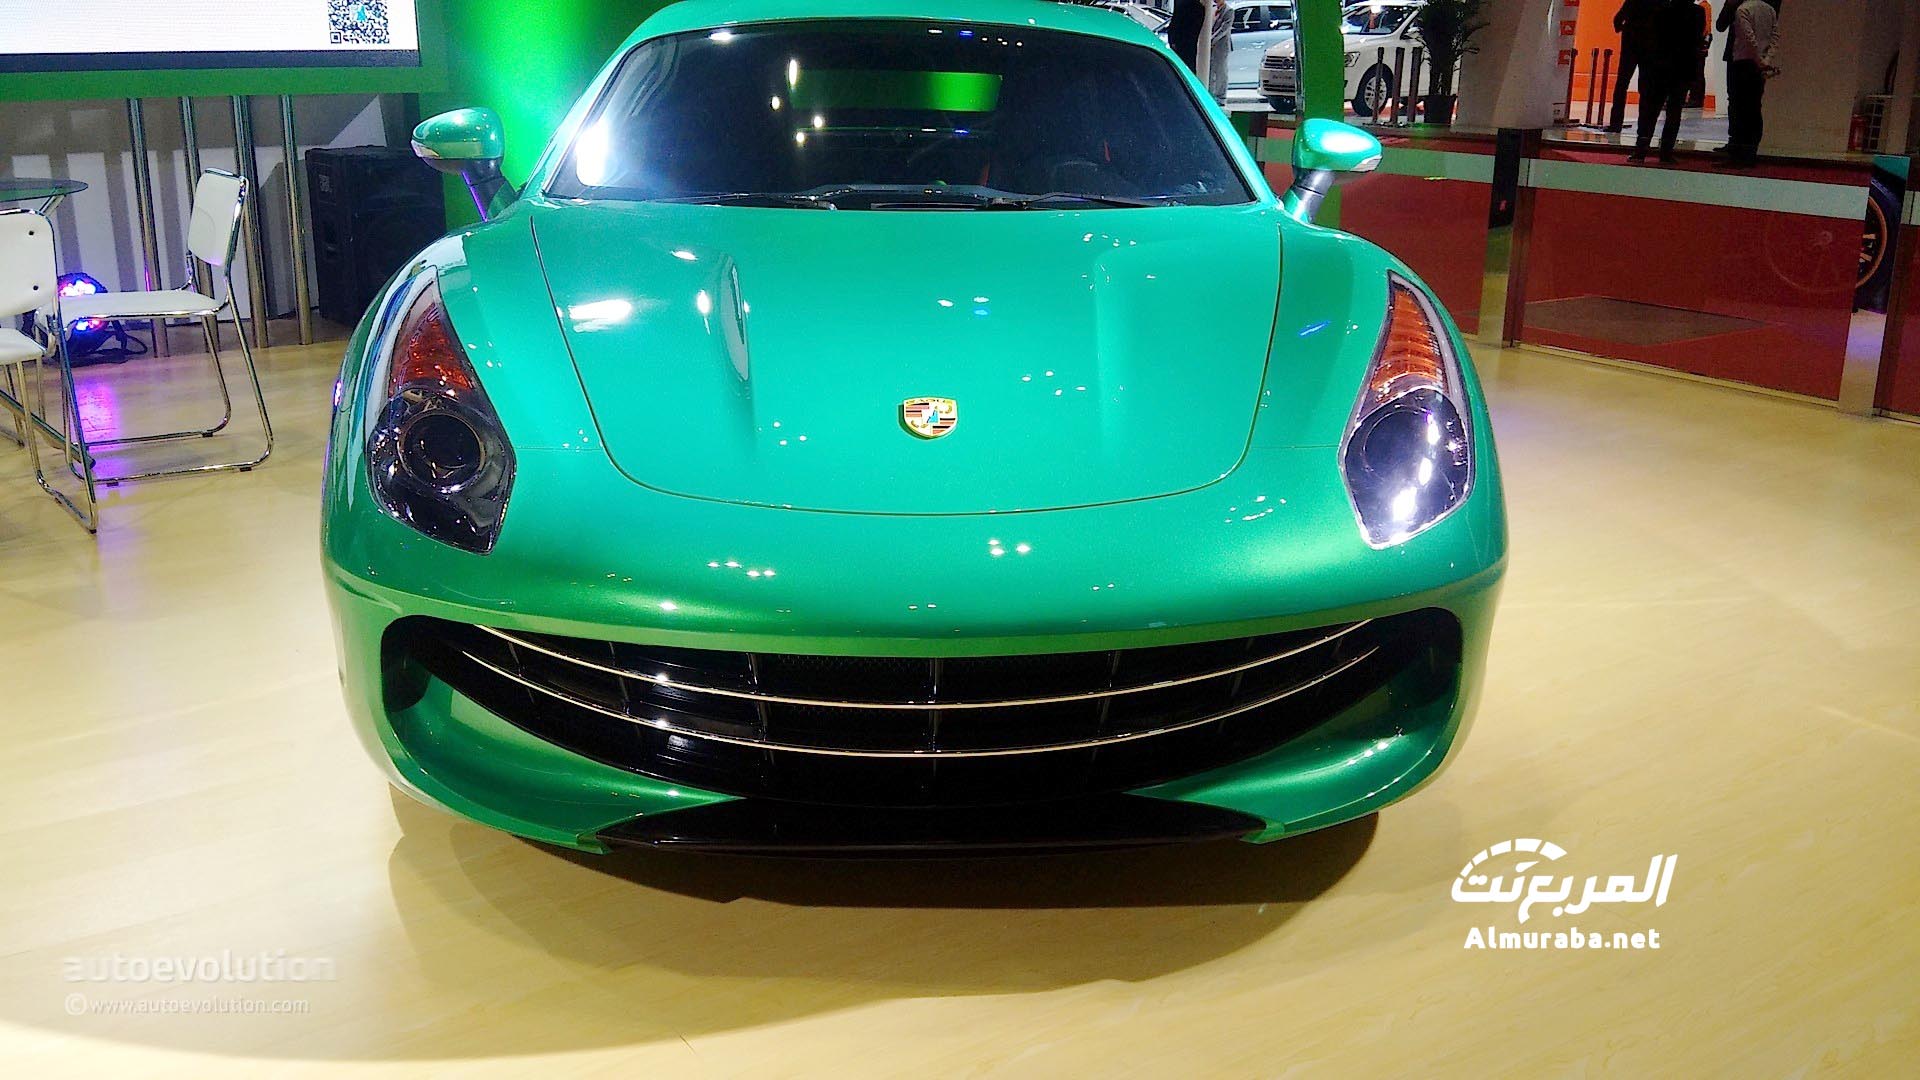 this-smiling-ferrari-is-a-chinese-porsche-cayman-copycat-in-shanghai-live-photos_7